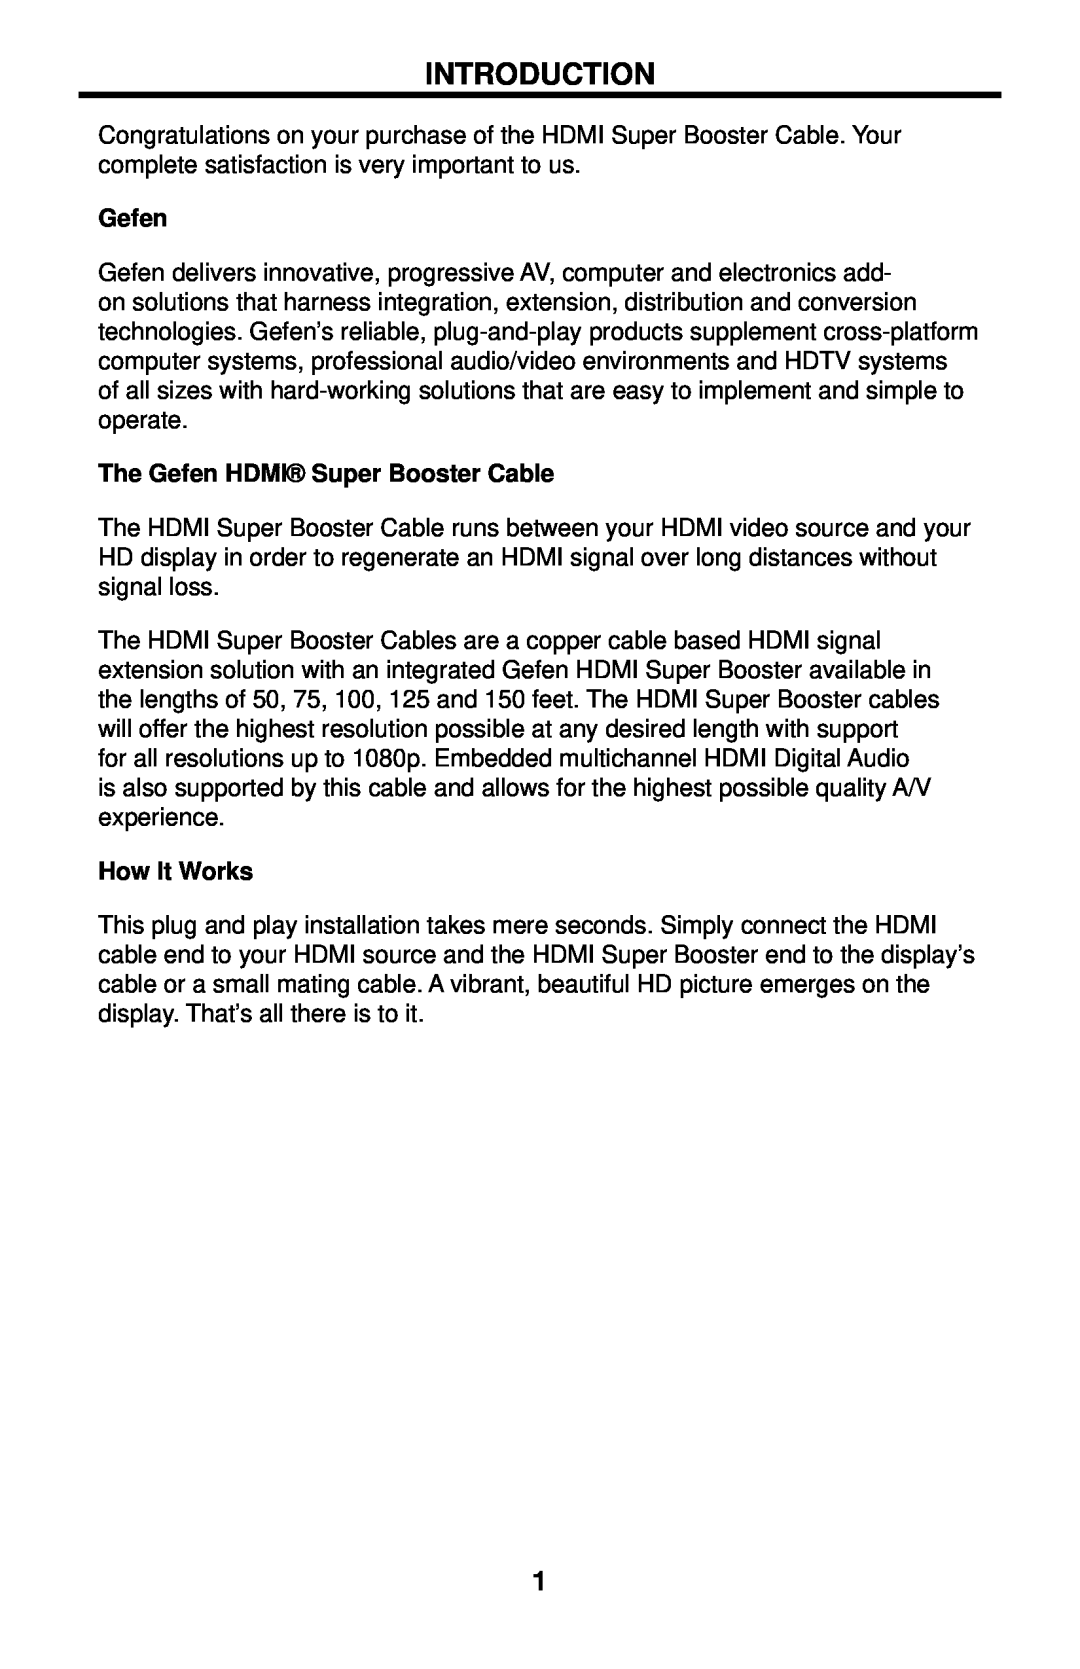 Gefen EXT-HDMISB user manual Introduction, The Gefen HDMI Super Booster Cable, How It Works 